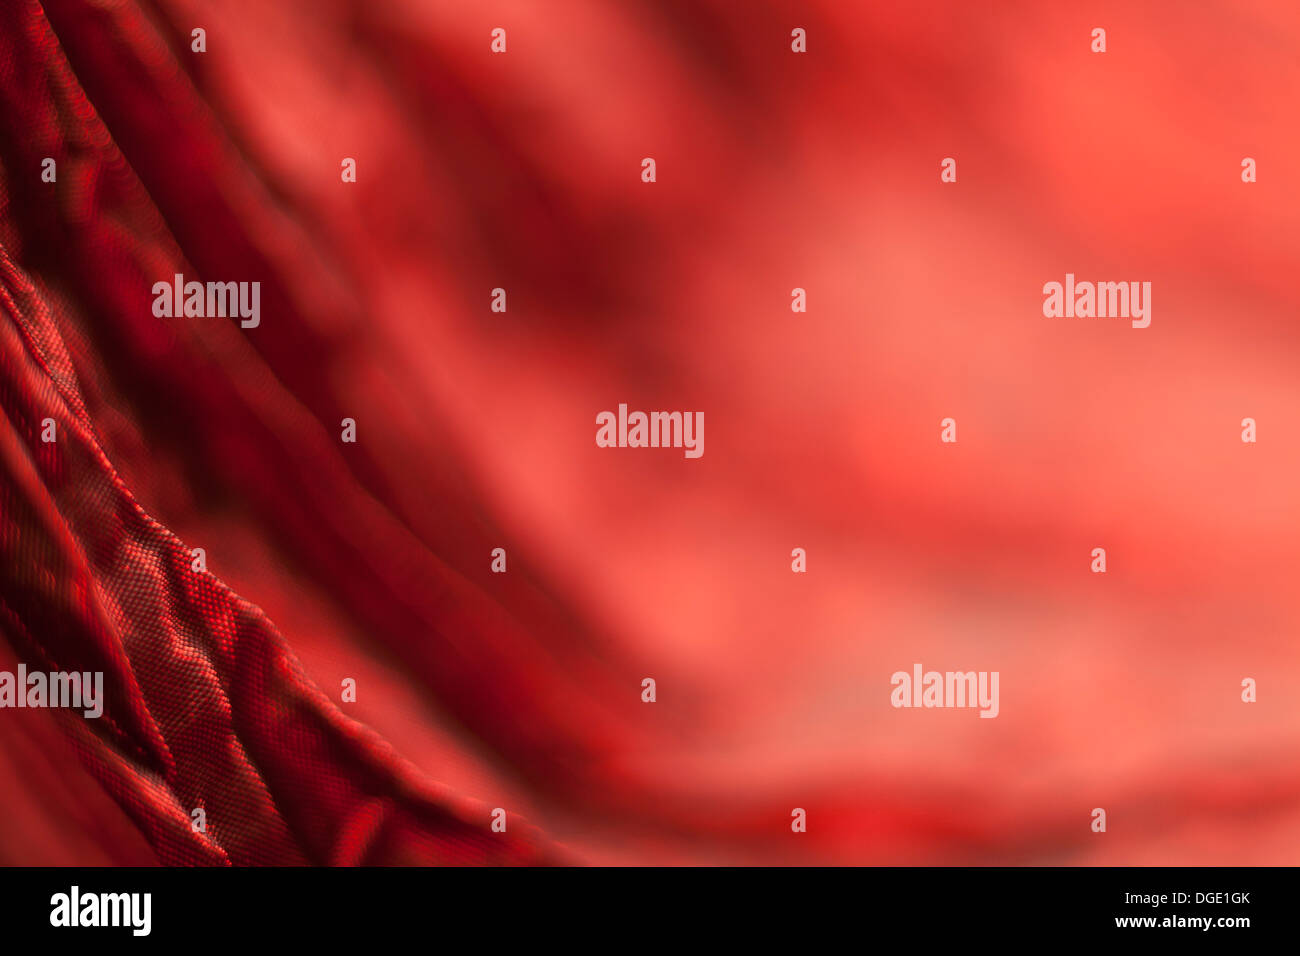 abstract red canvas background or crimson backdrop Stock Photo